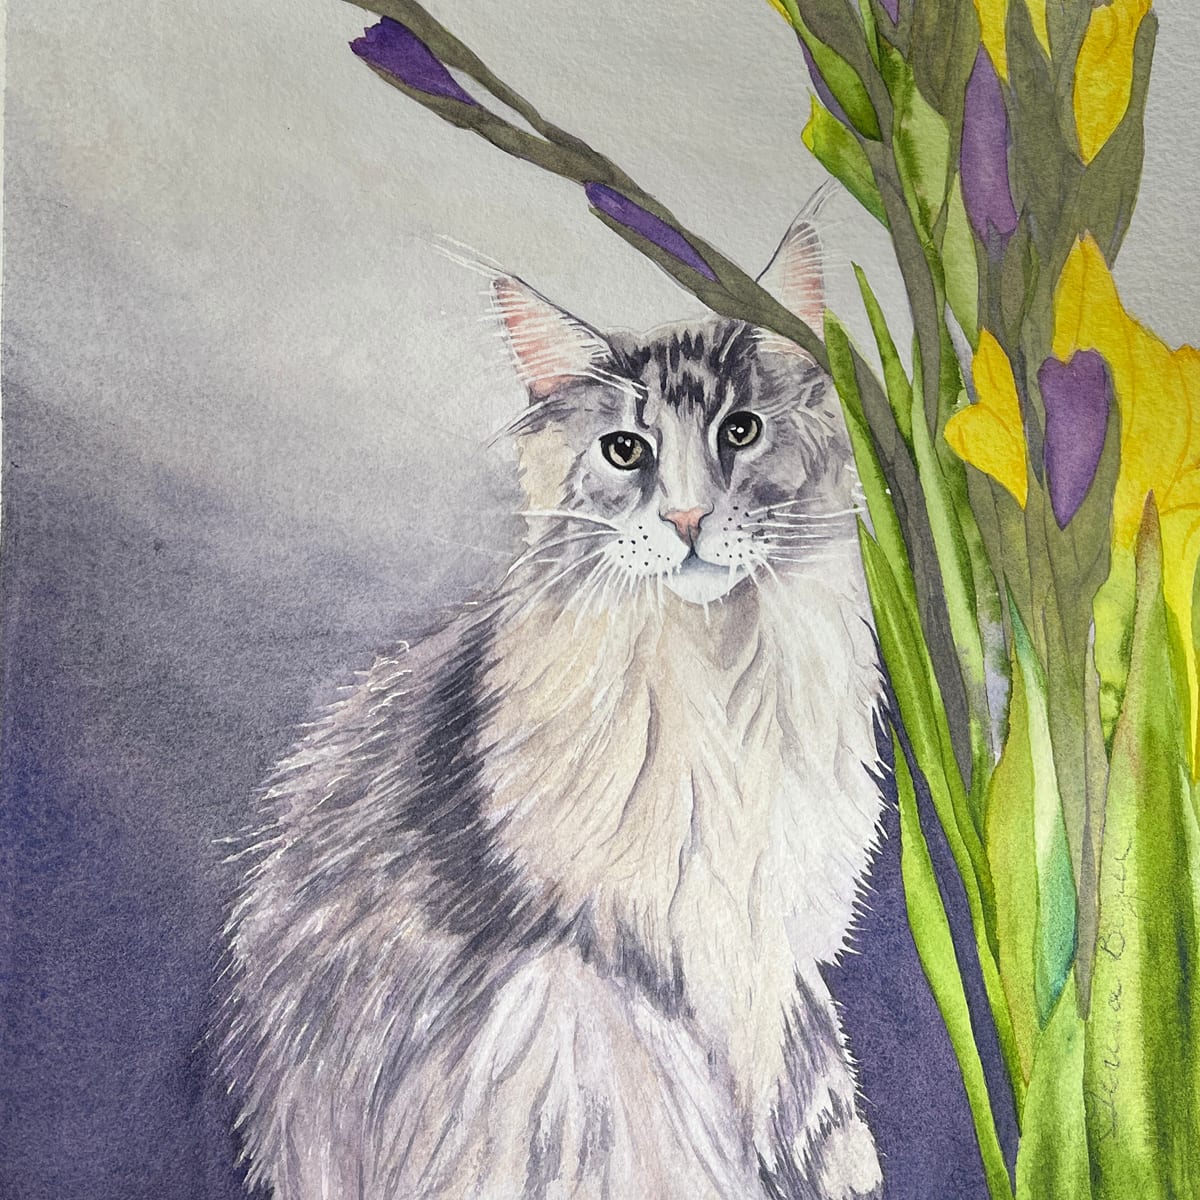 Tigger with Glads by Teresa Beyer   Image: Tigger with Glads